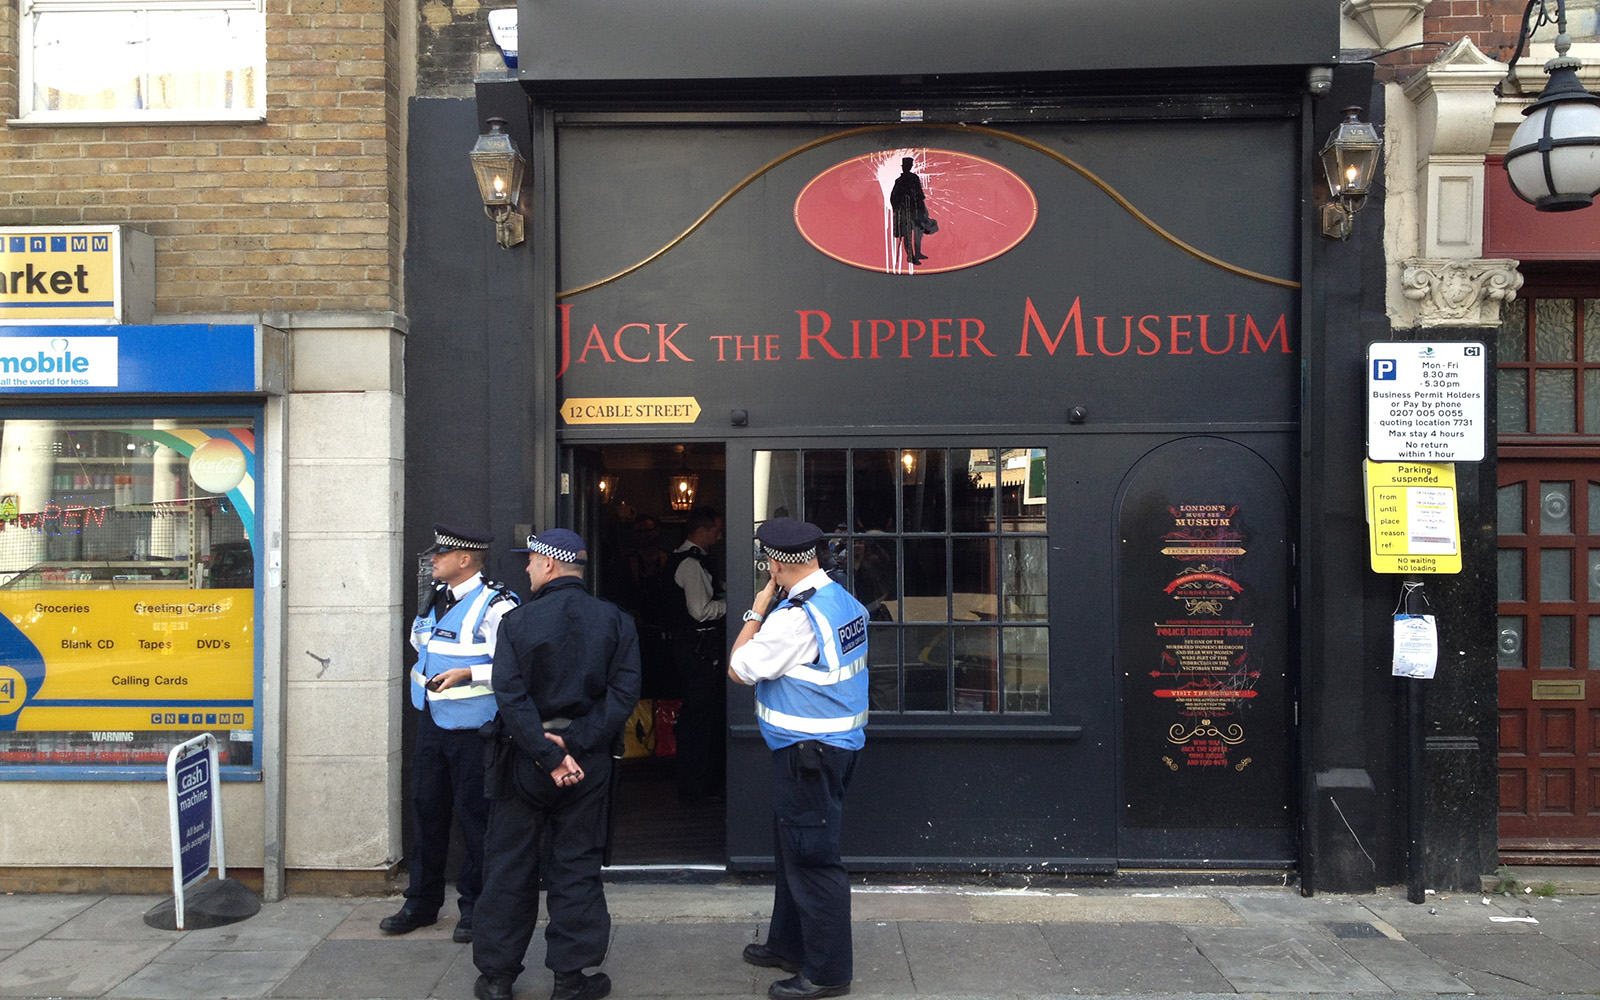 Jack The Ripper Museum 4 October 2015